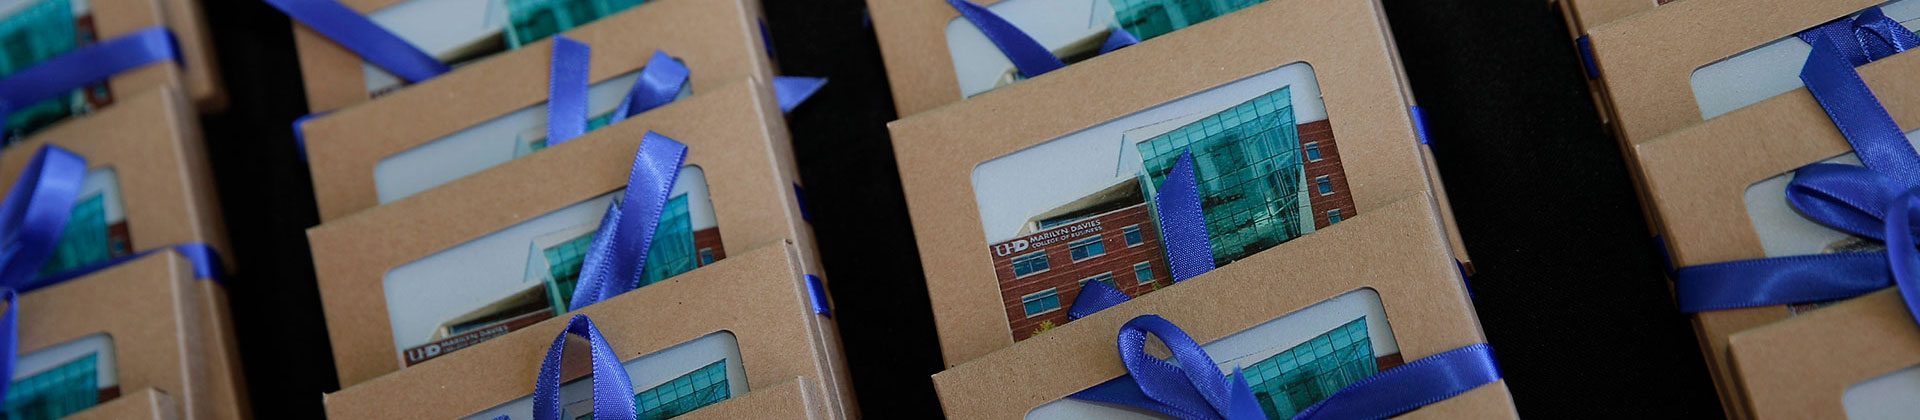 thank you cards with MDCOB printed on it wrapped in a blue ribbon